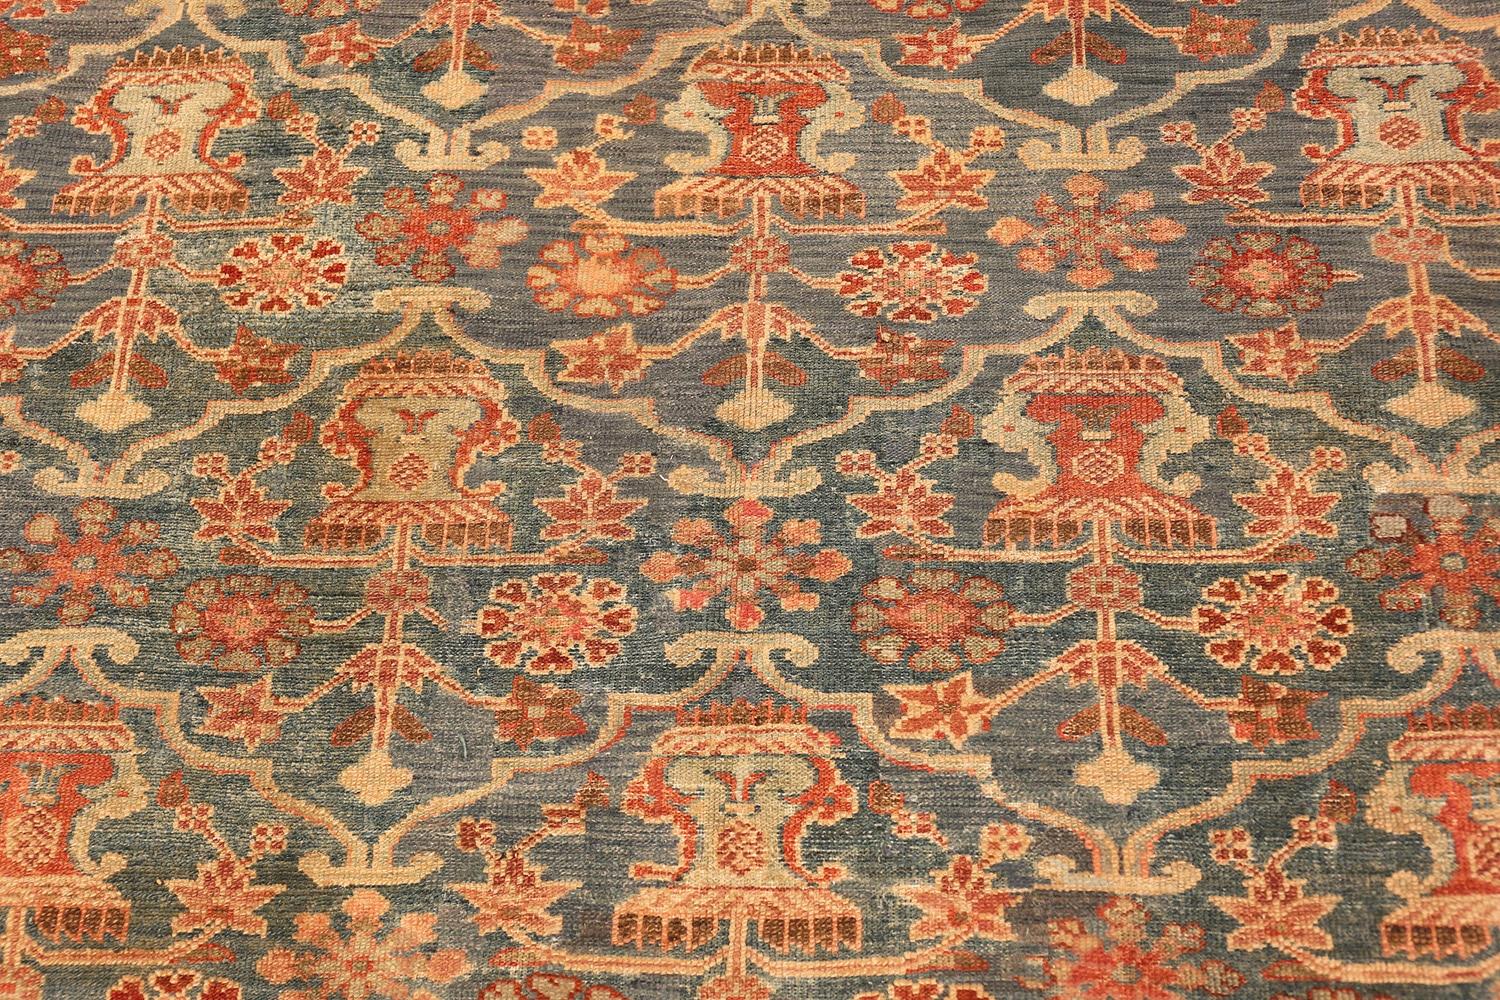 Antique Persian Bibikabad Rug. 7 ft 6 in x 10 ft (2.29 m x 3.05 m) In Good Condition For Sale In New York, NY